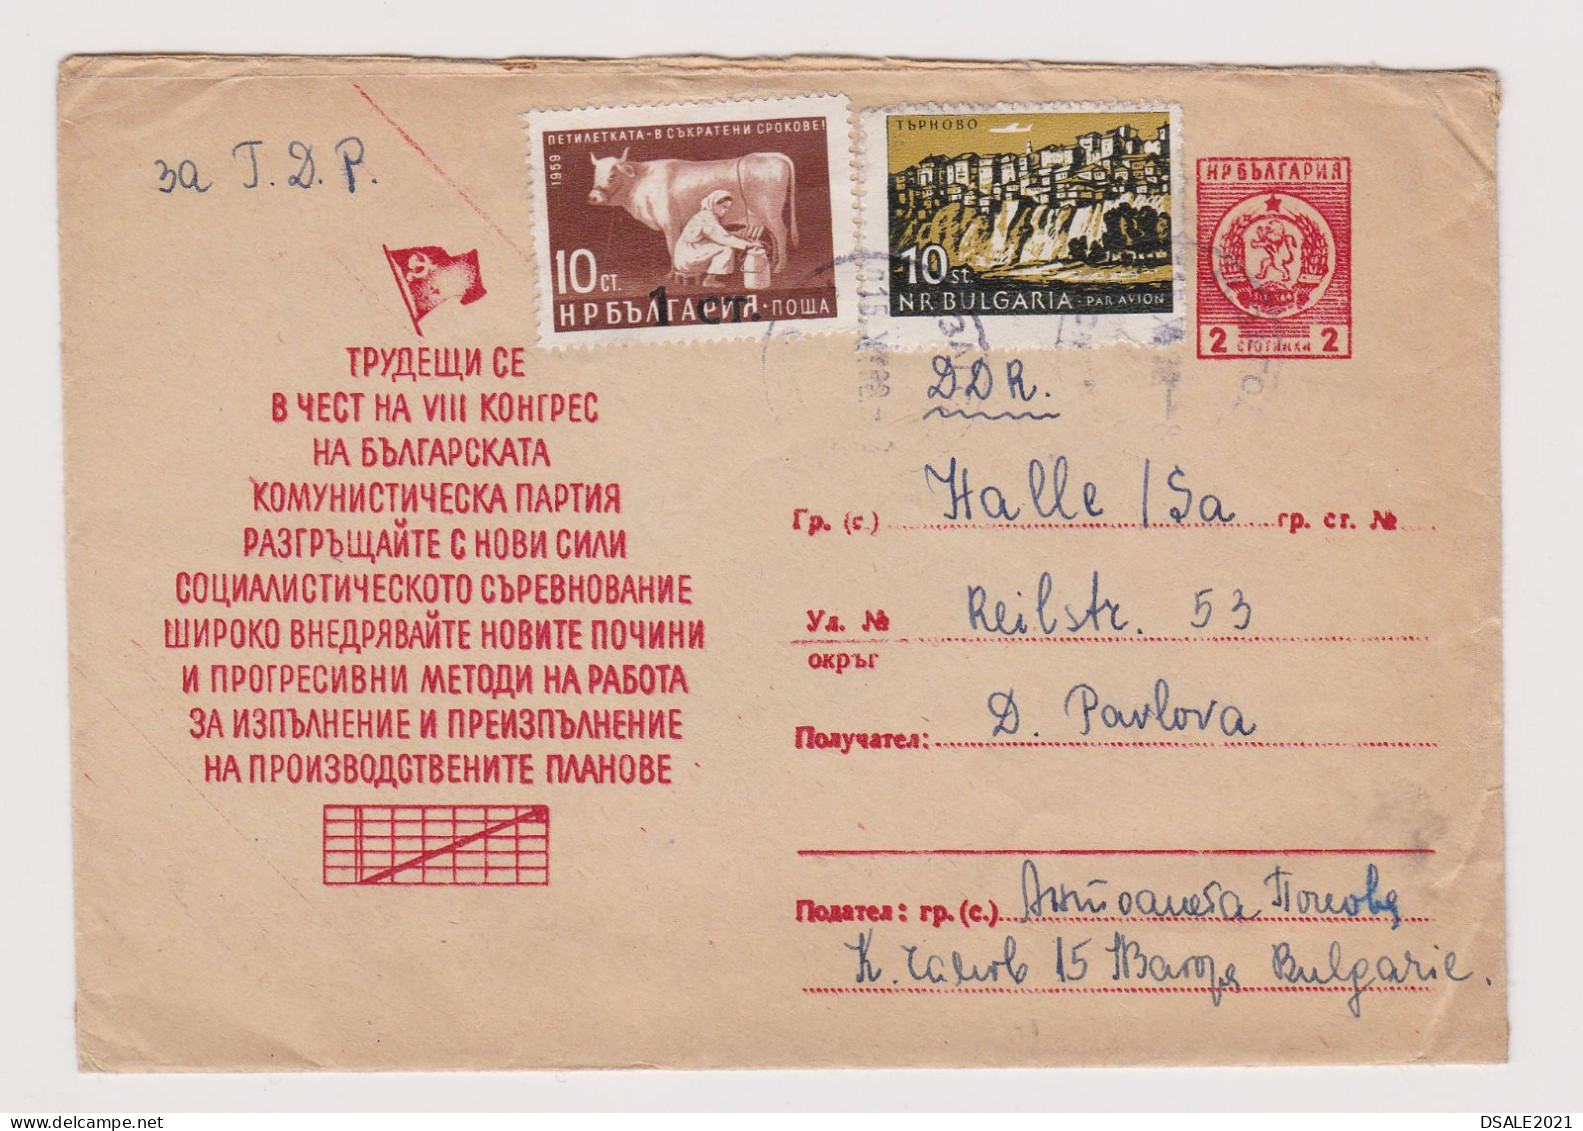 Bulgaria Bulgarie Bulgarien 1962 Ganzsachen, Entier, Stationery Cover, Communist Slogan, Topic Stamps To DDR (66241) - Covers